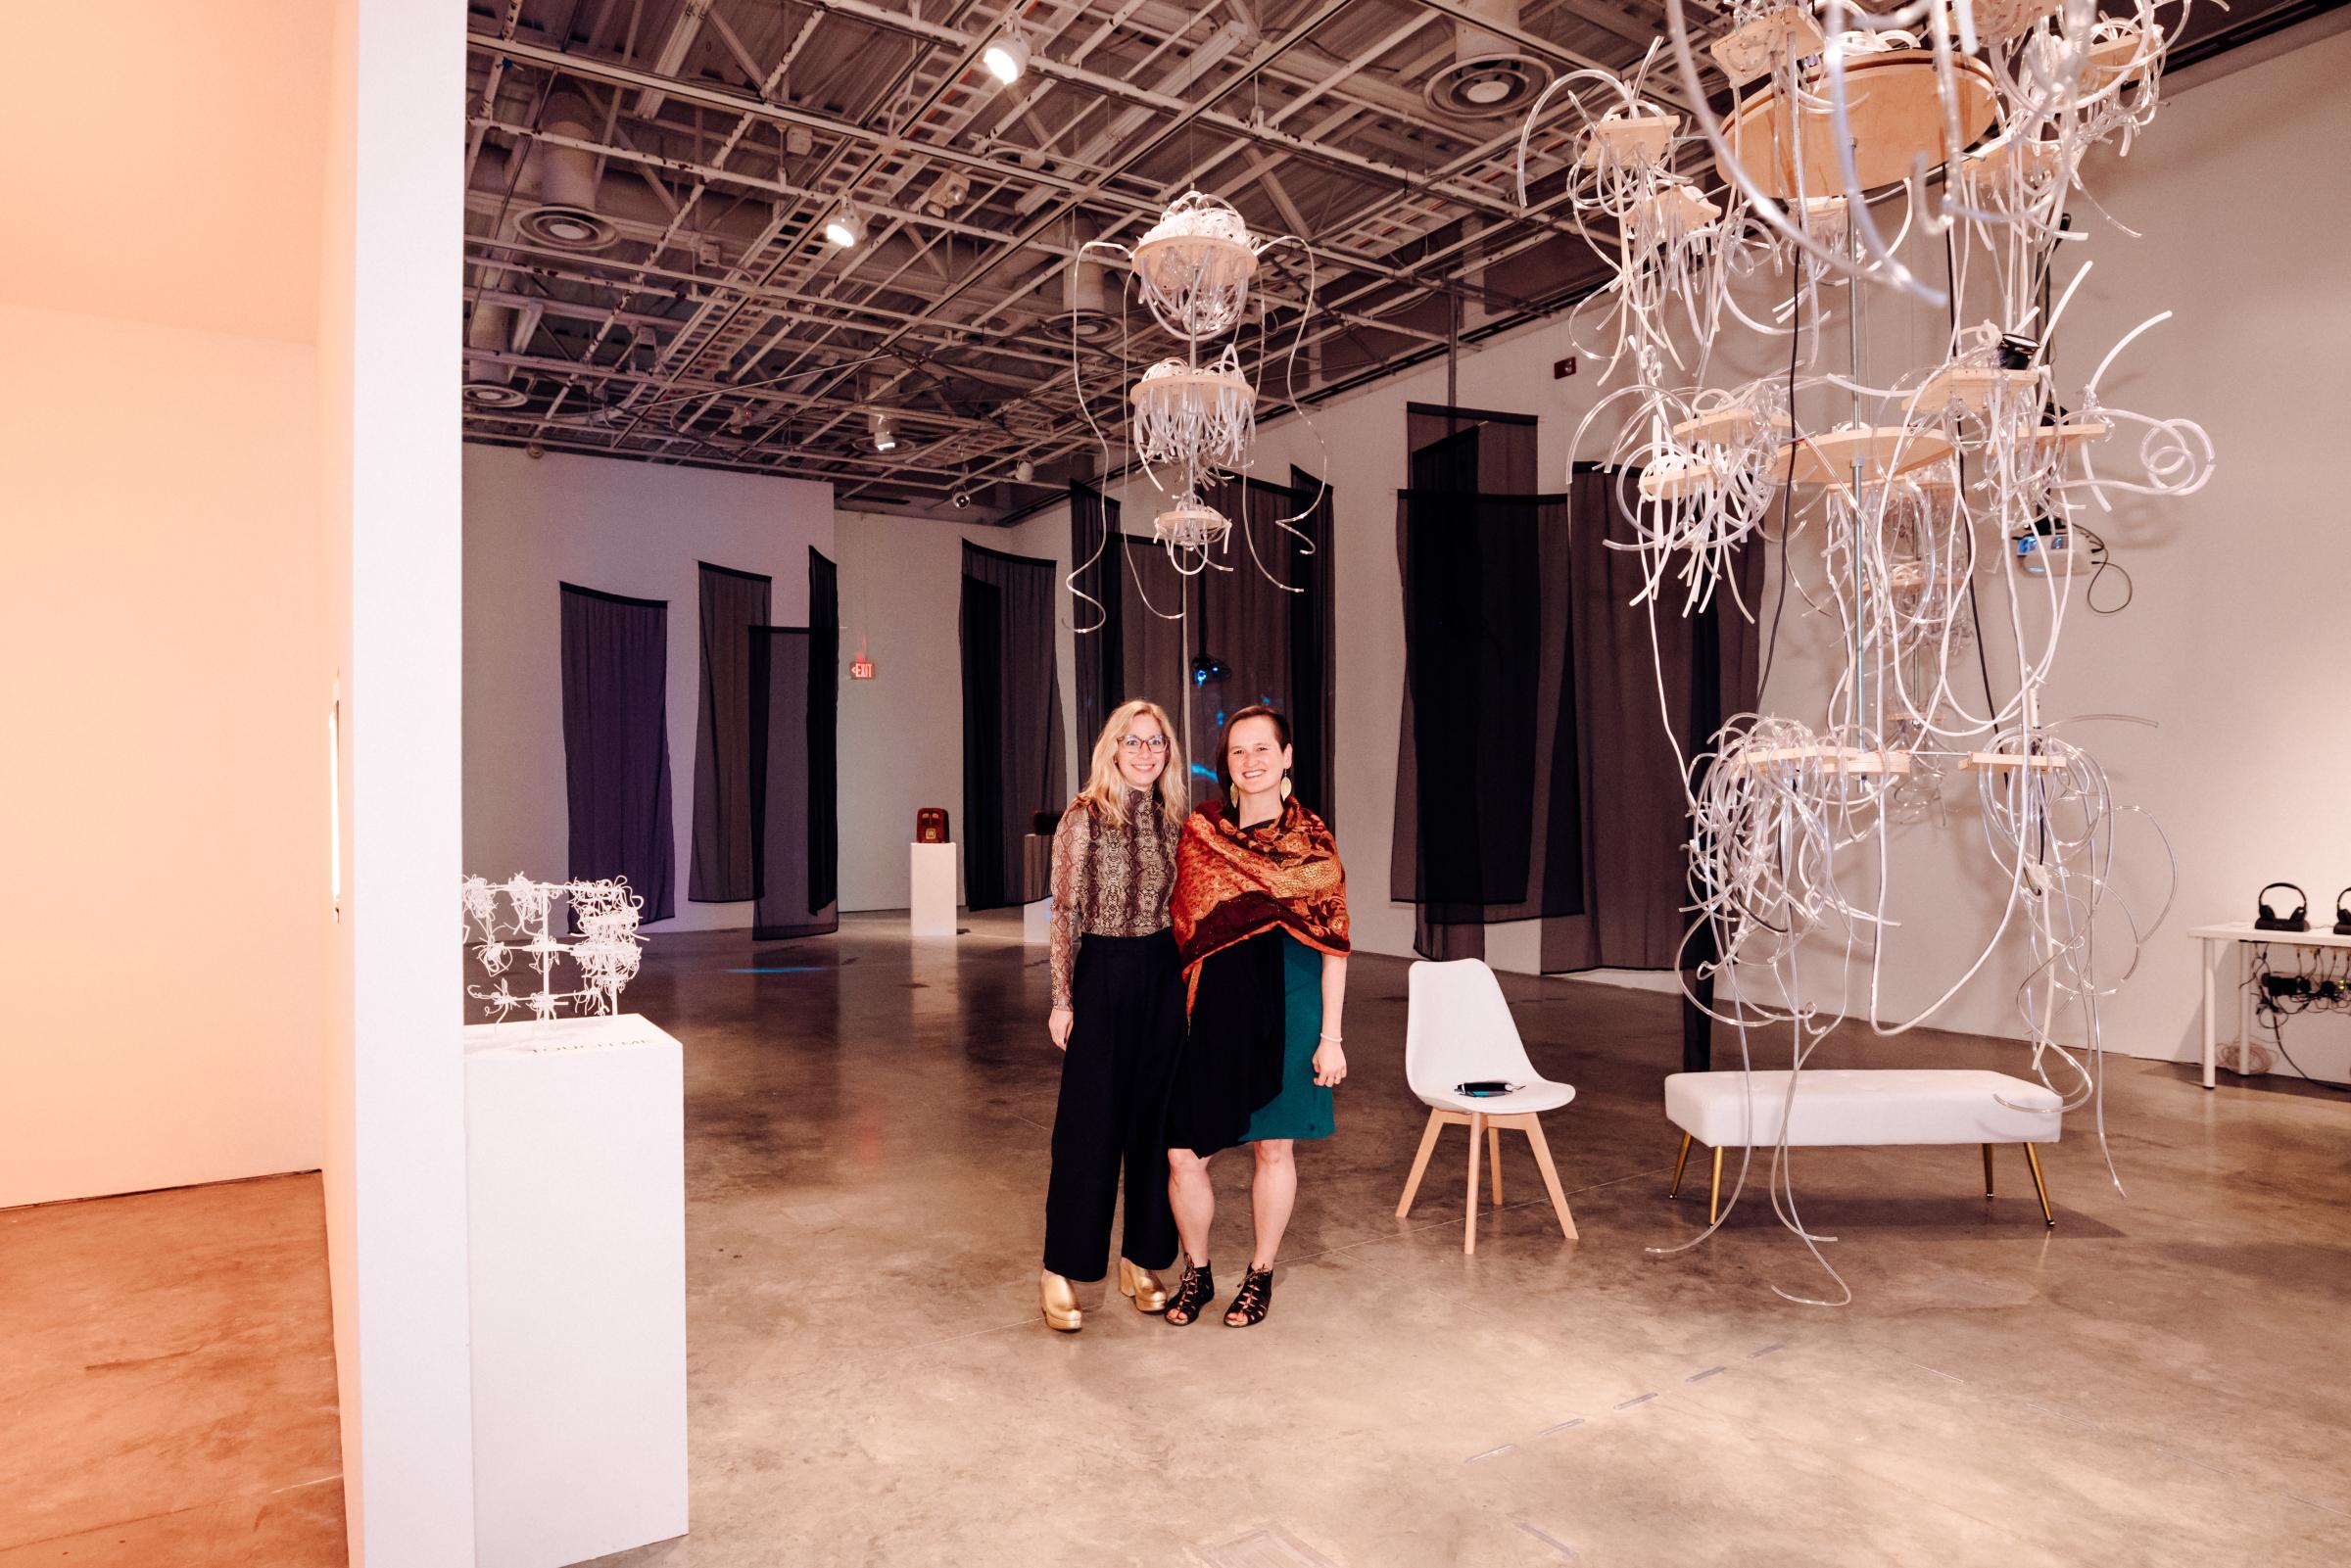 A blonde haired woman and a brown haired woman stand together in the middle of the E.A.A.T. gallery space. 

